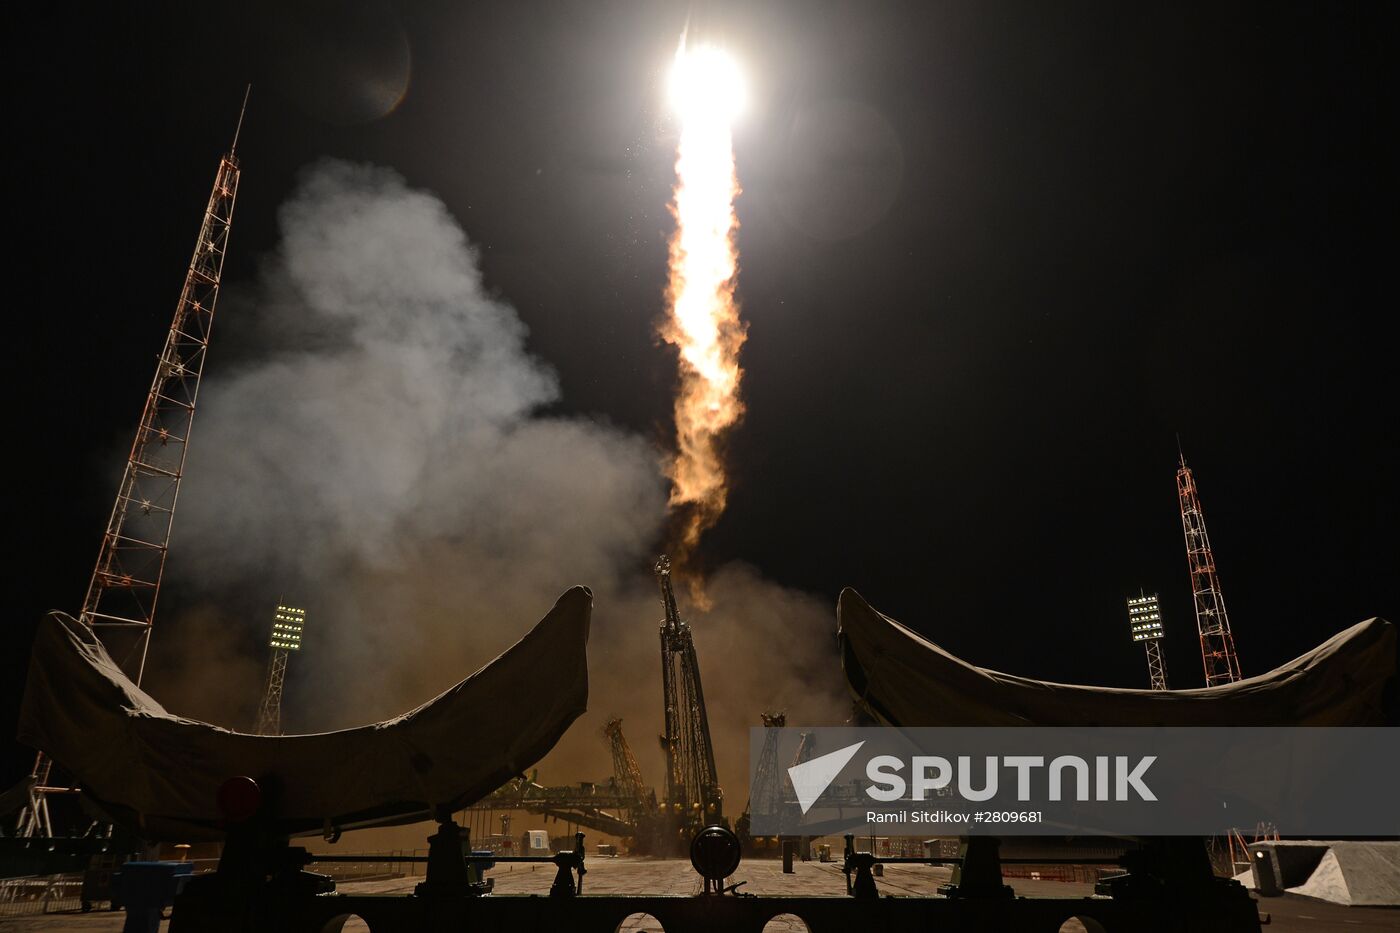 Soyuz-FG carrying Soyuz TMA-20M spacecraft launches from Baikonur Space Center